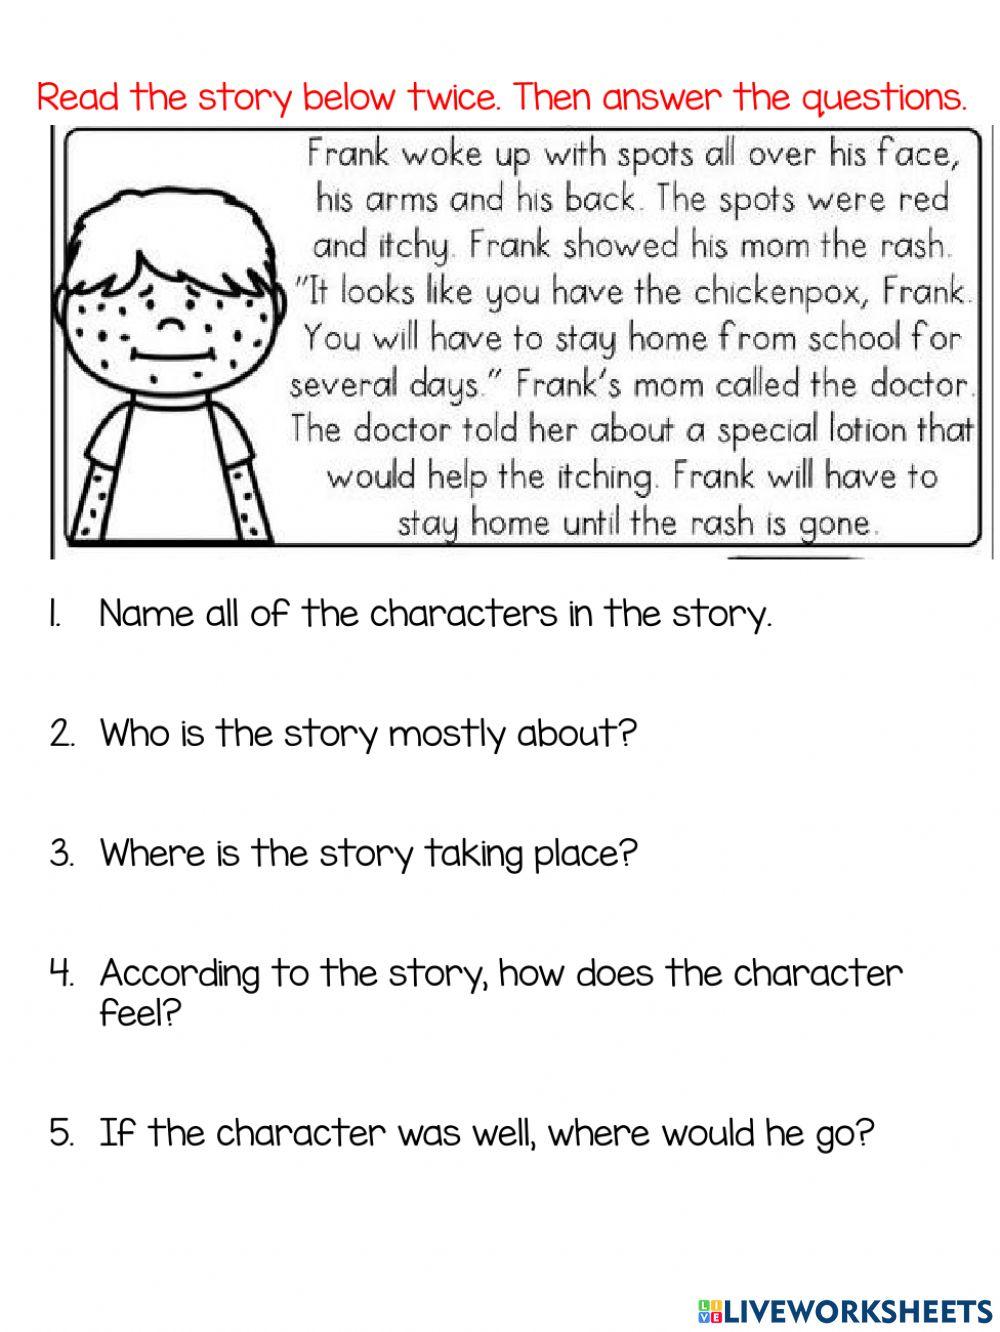 Character and setting